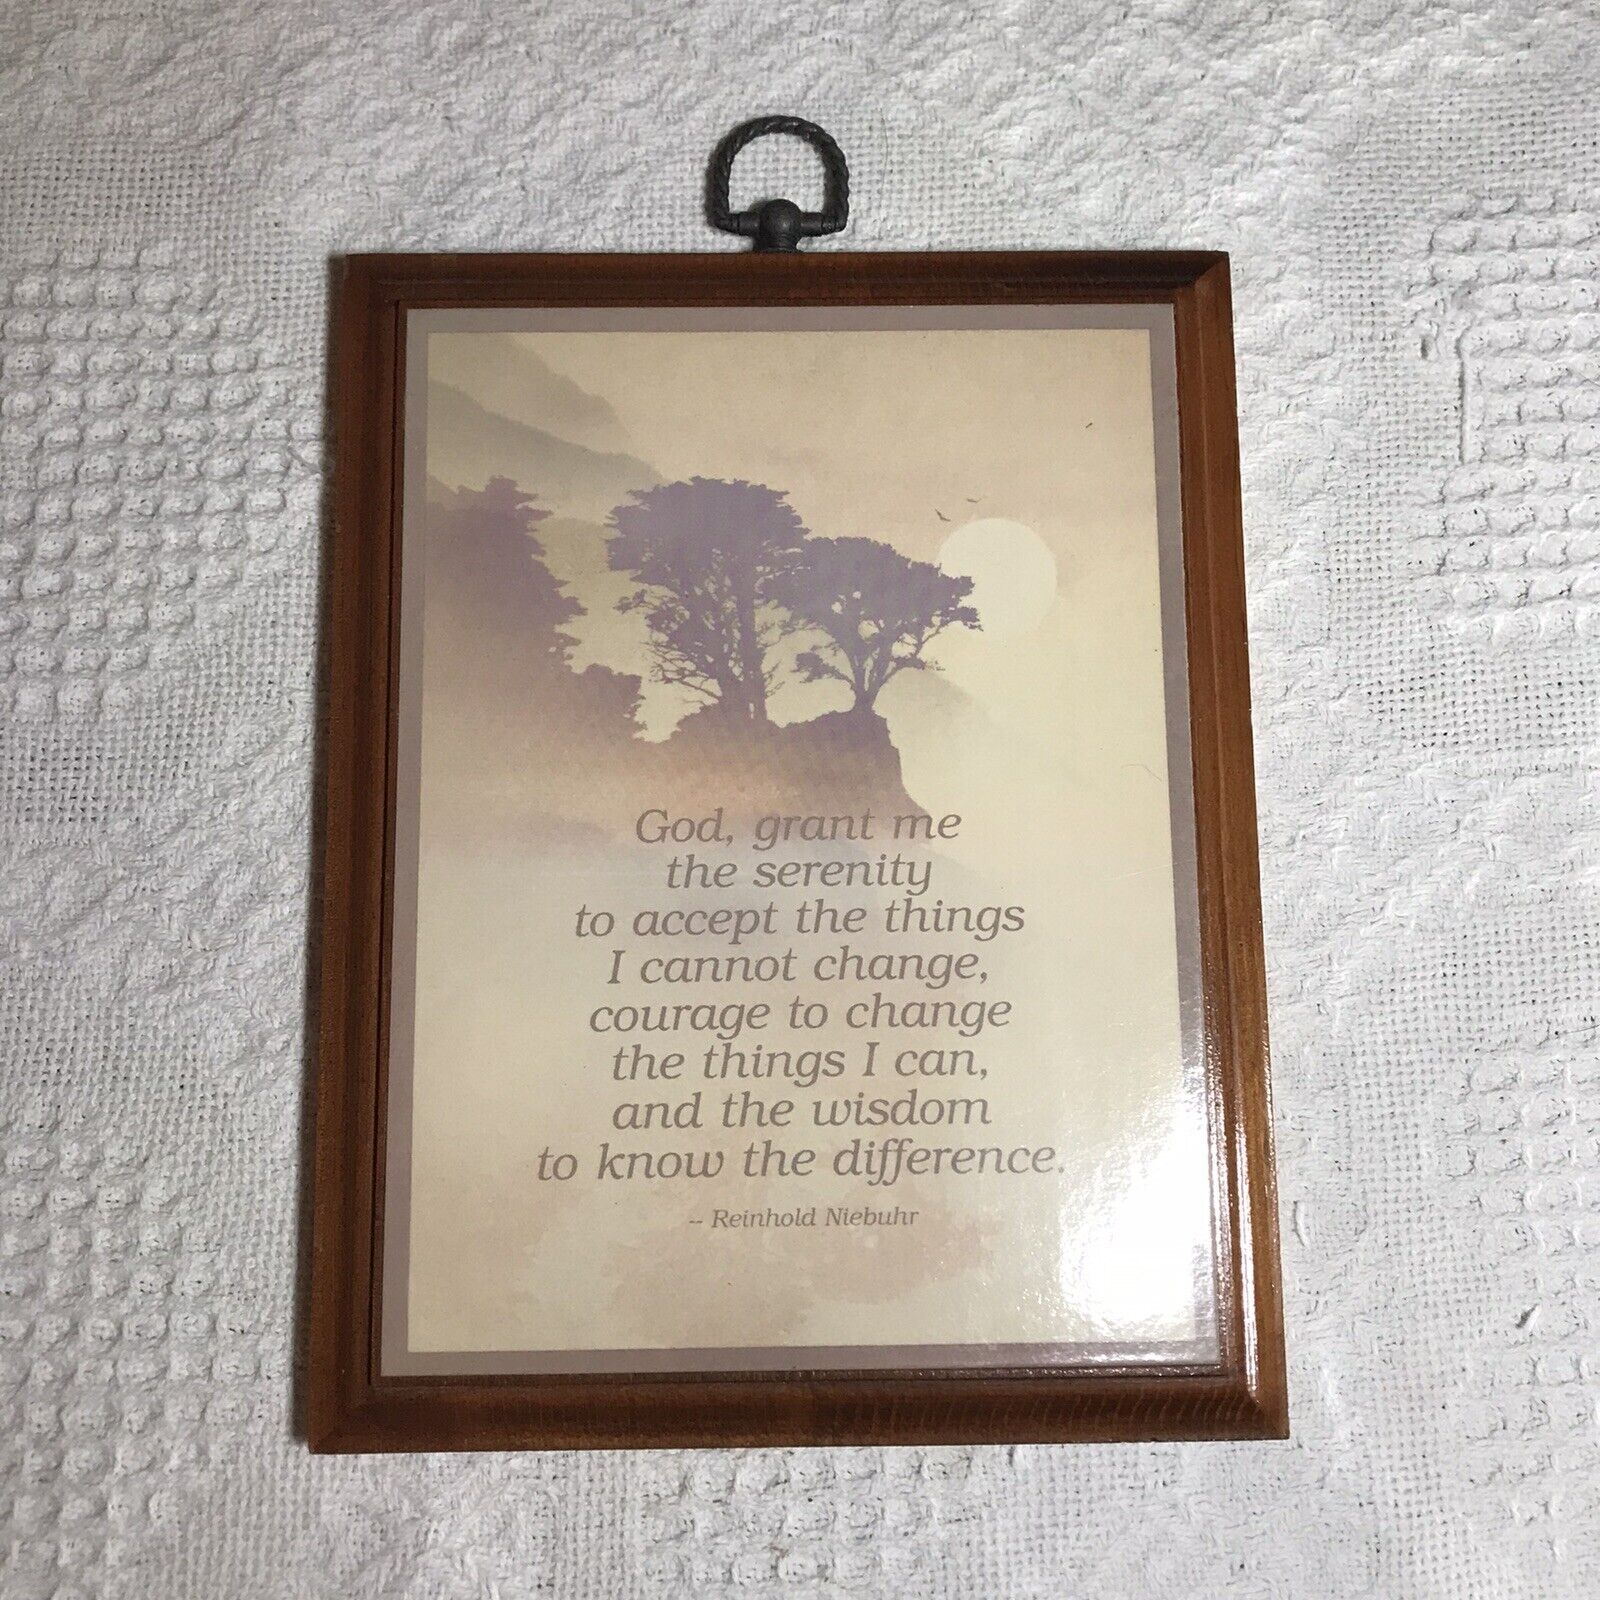 Vintage Serenity Prayer Wooden Plaque Wall Hanging Decor By Reinhold Niebuhr